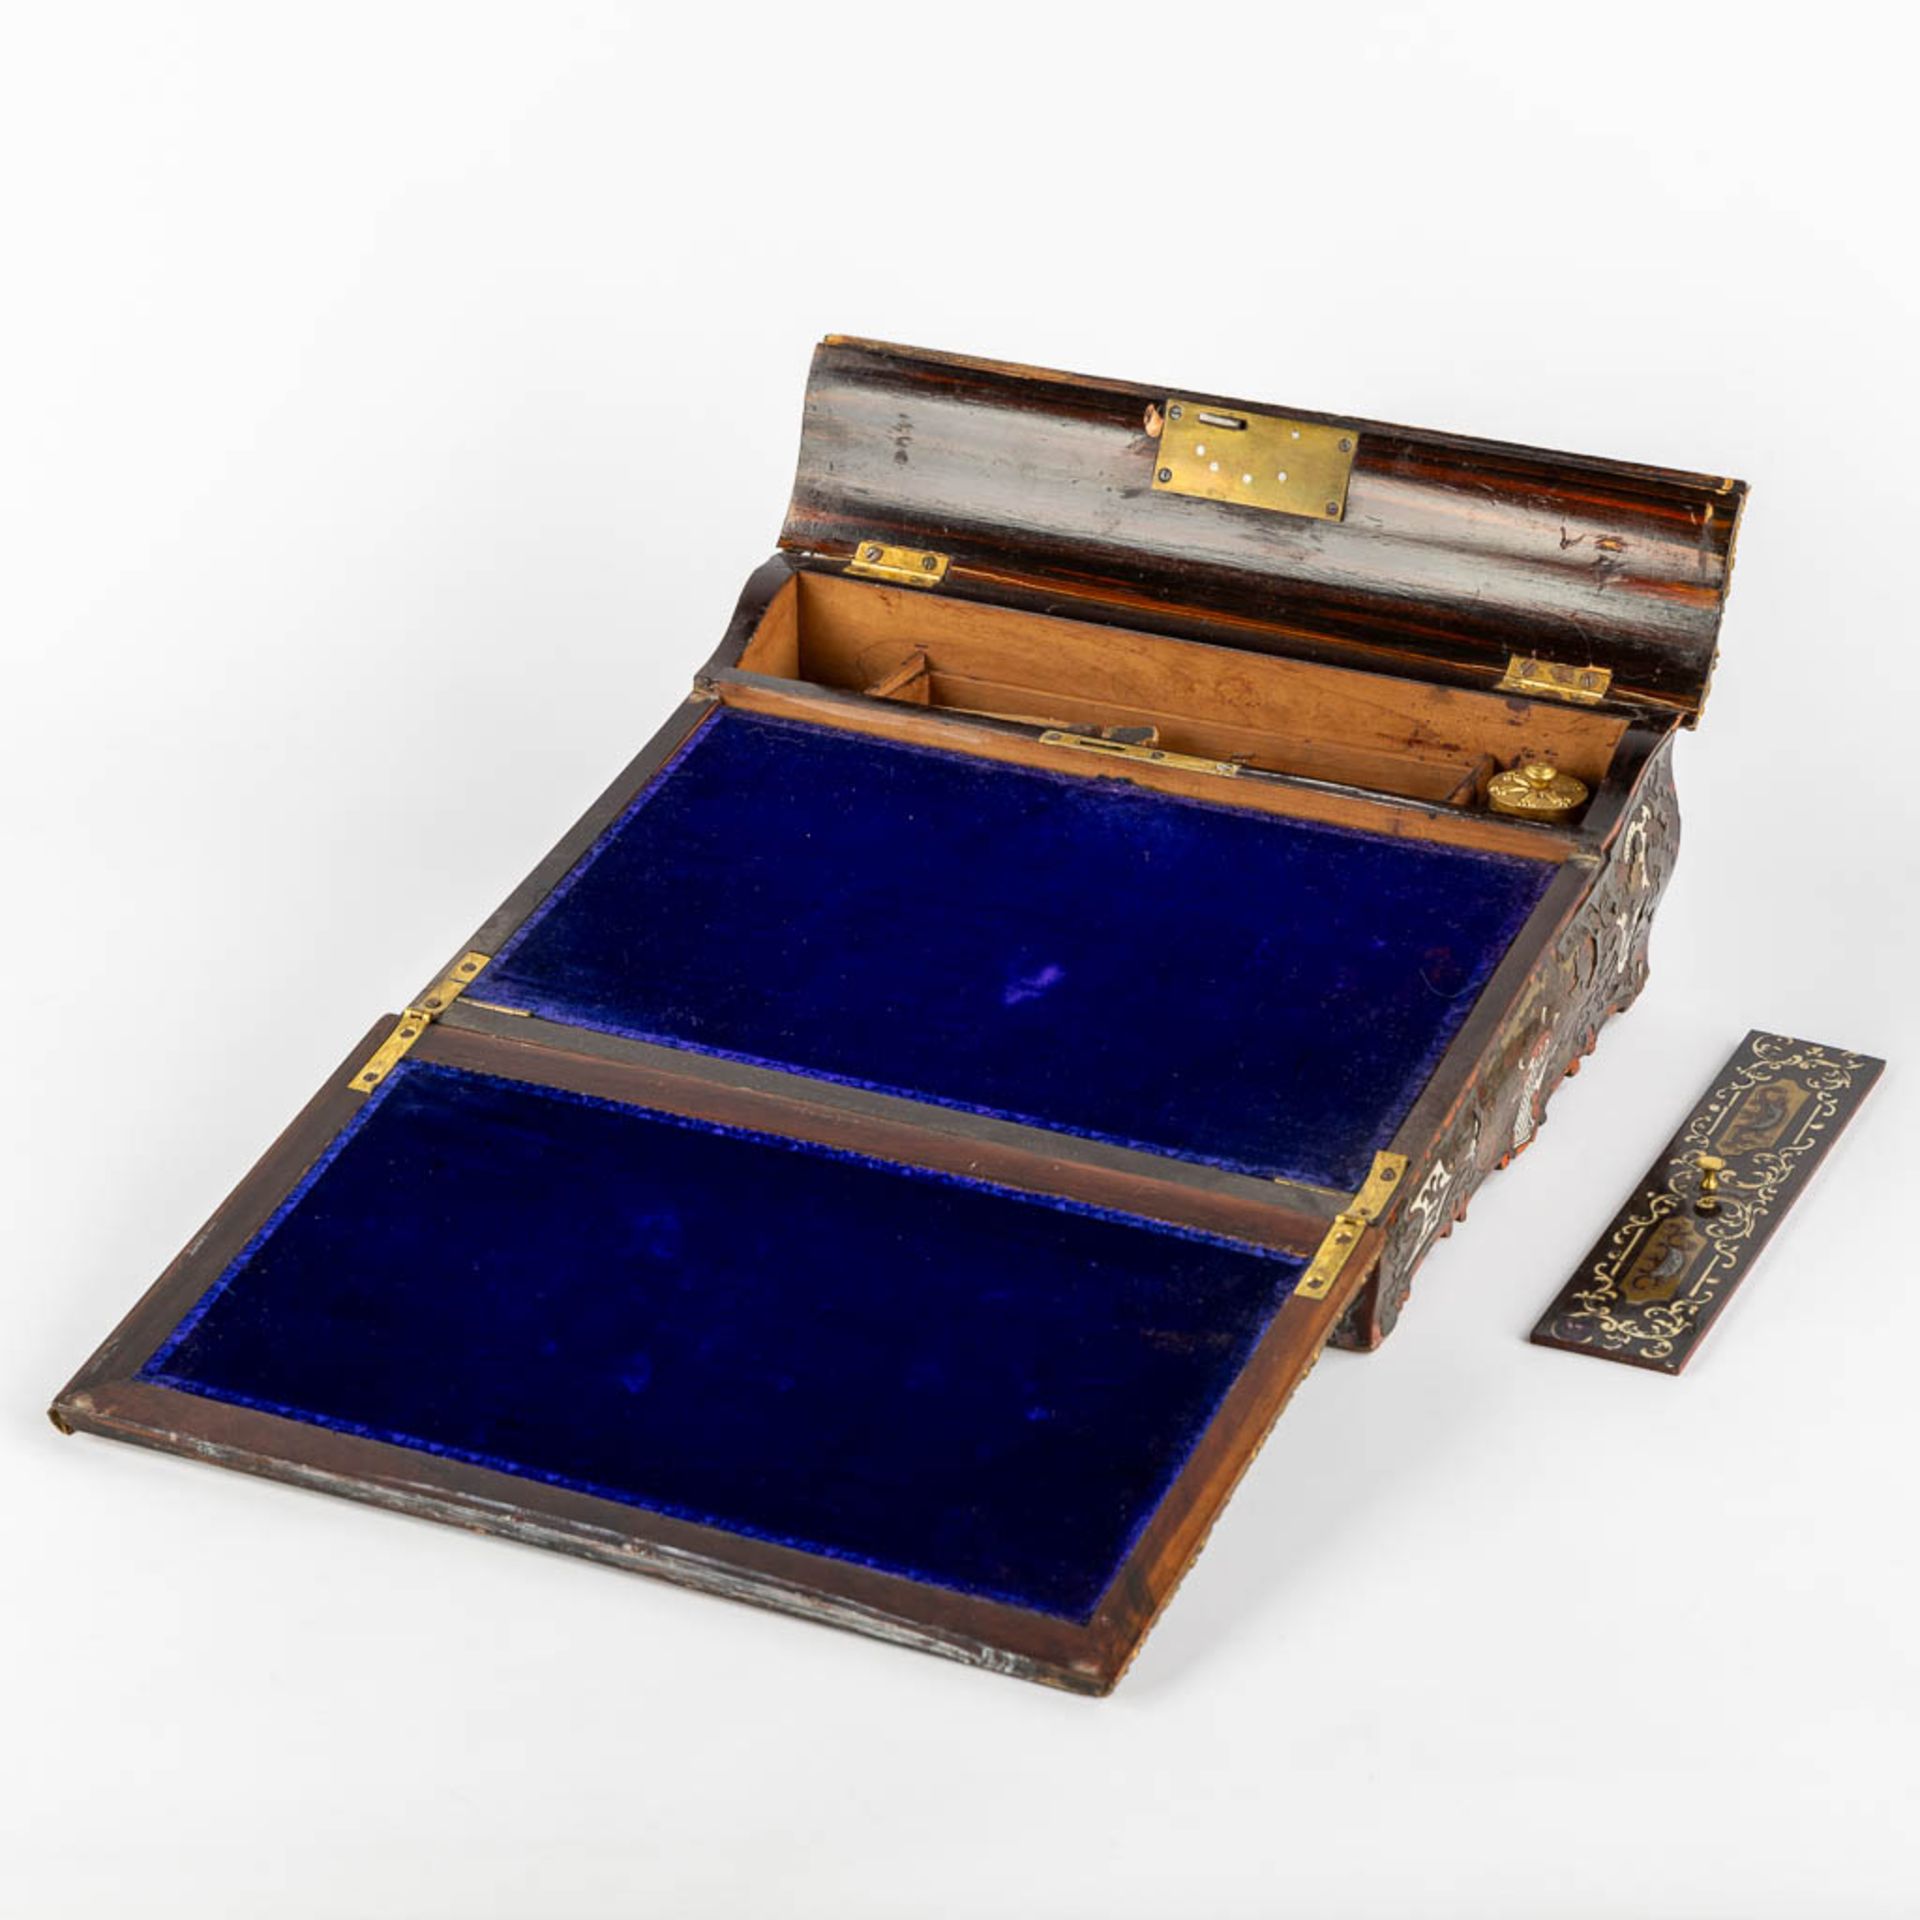 An antique writing desk, Boulle and marquetry inlay. Napoleon 3. (L:24 x W:31 x H:10,5 cm) - Image 4 of 12